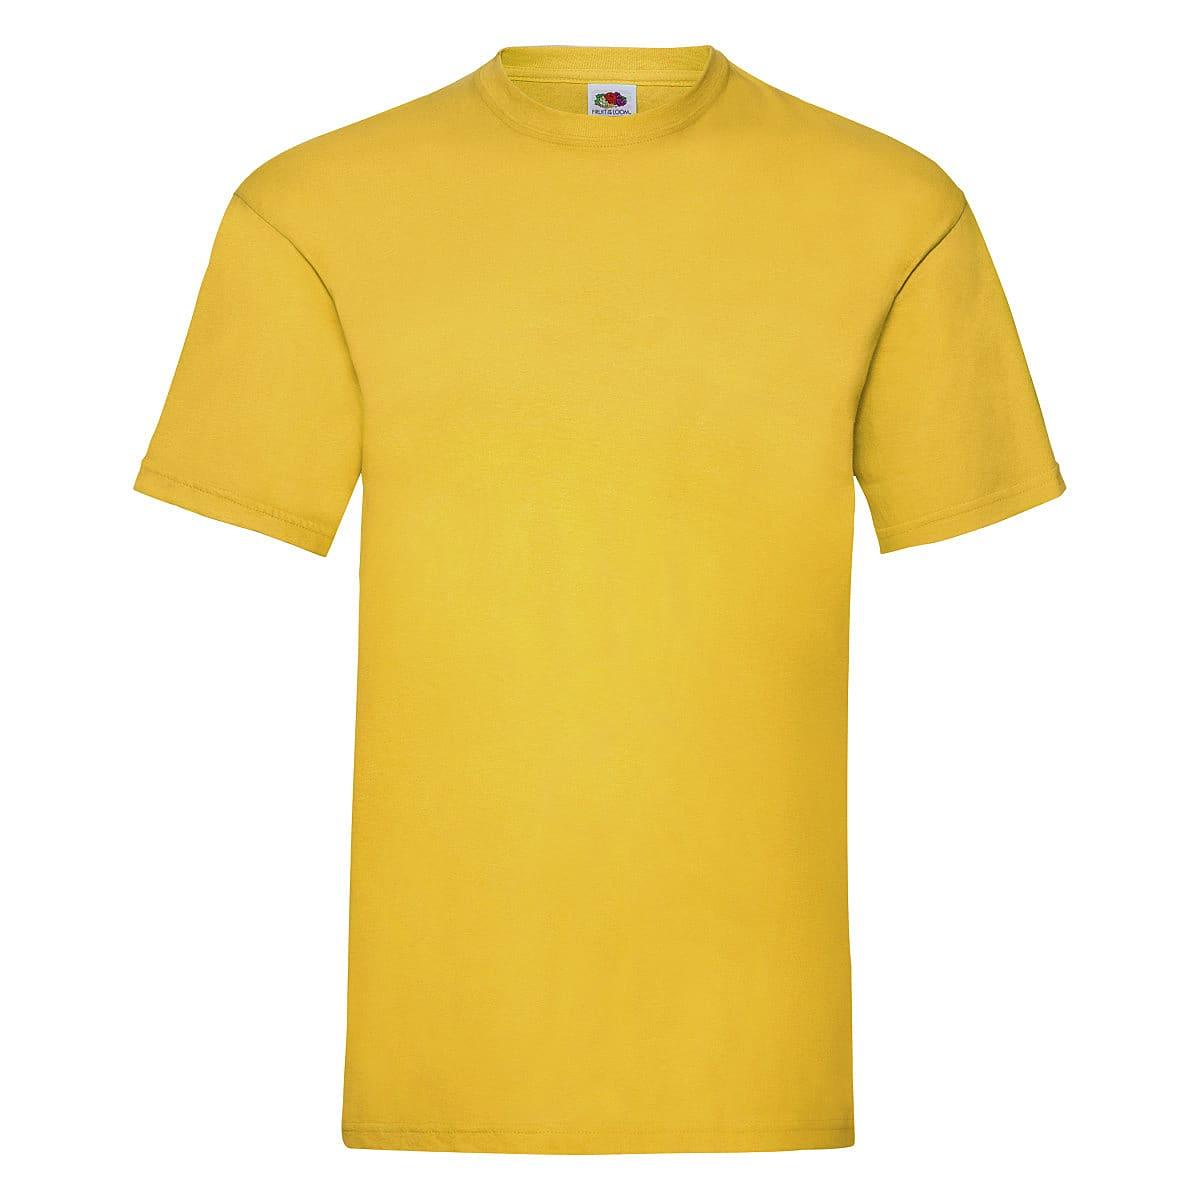 Fruit Of The Loom Valueweight T-Shirt in Sunflower (Product Code: 61036)